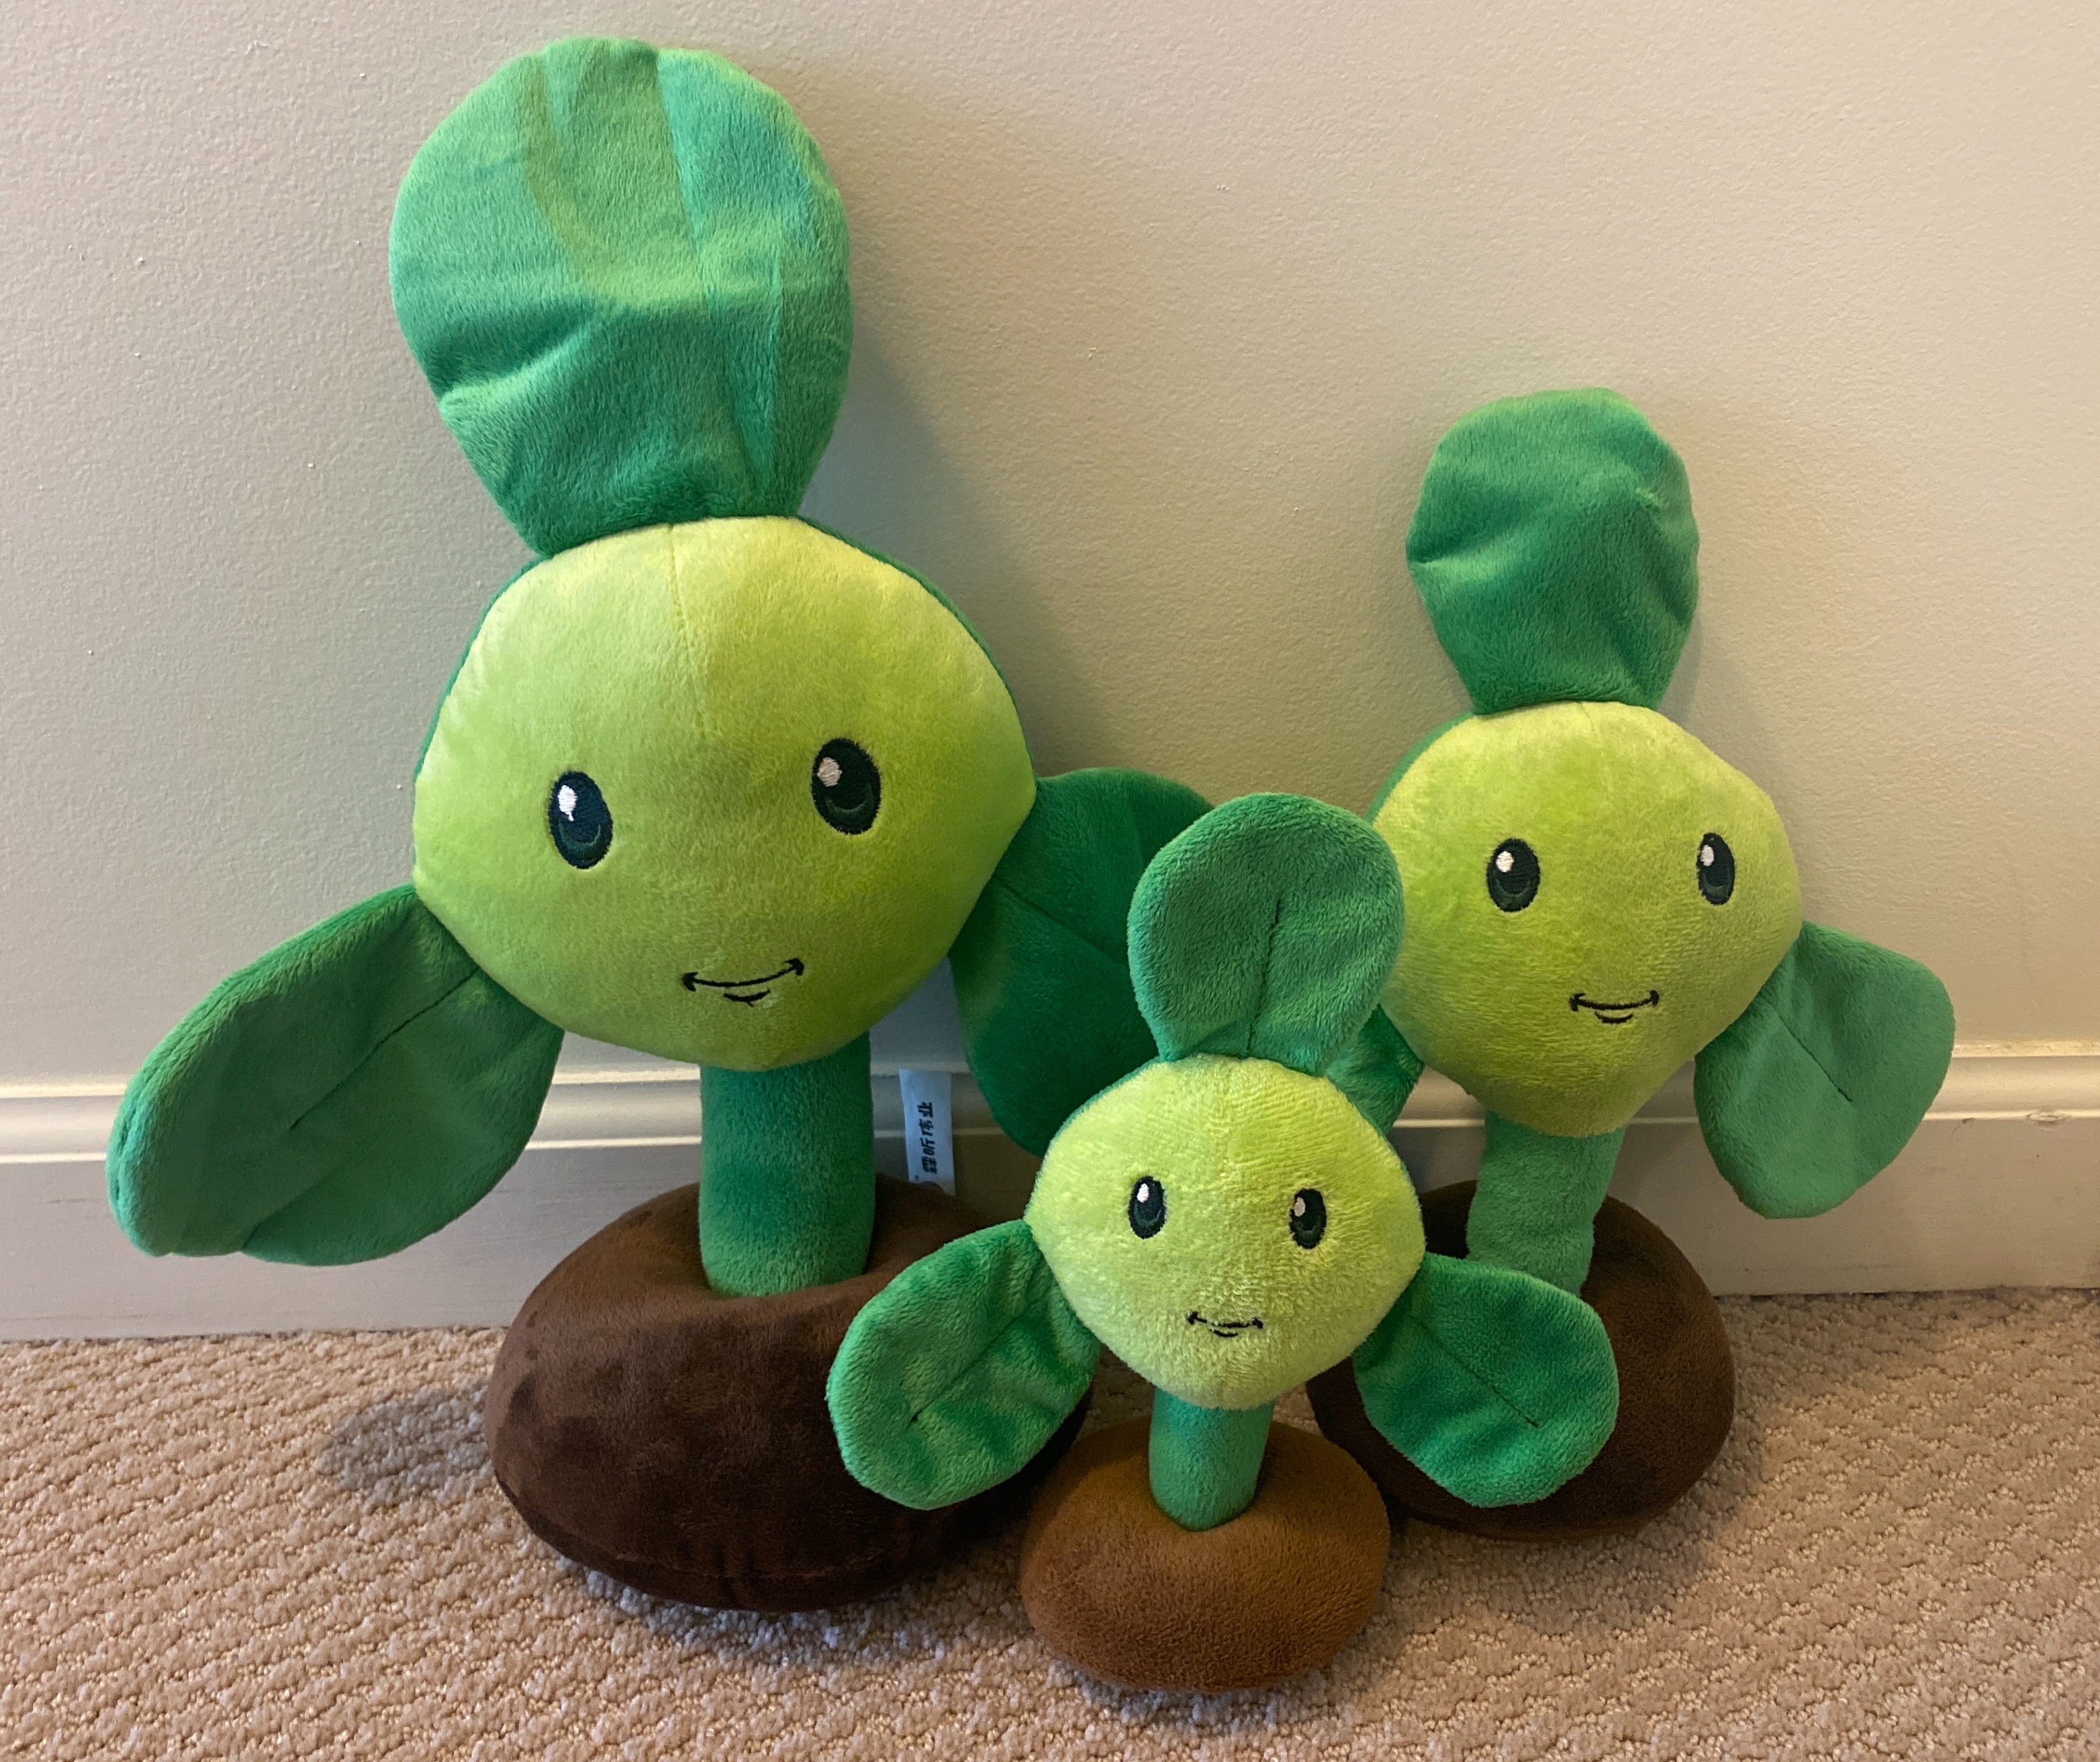 https://static.wikia.nocookie.net/pvzplush/images/6/66/Agent_b_lovers.jpg/revision/latest?cb=20230312190325